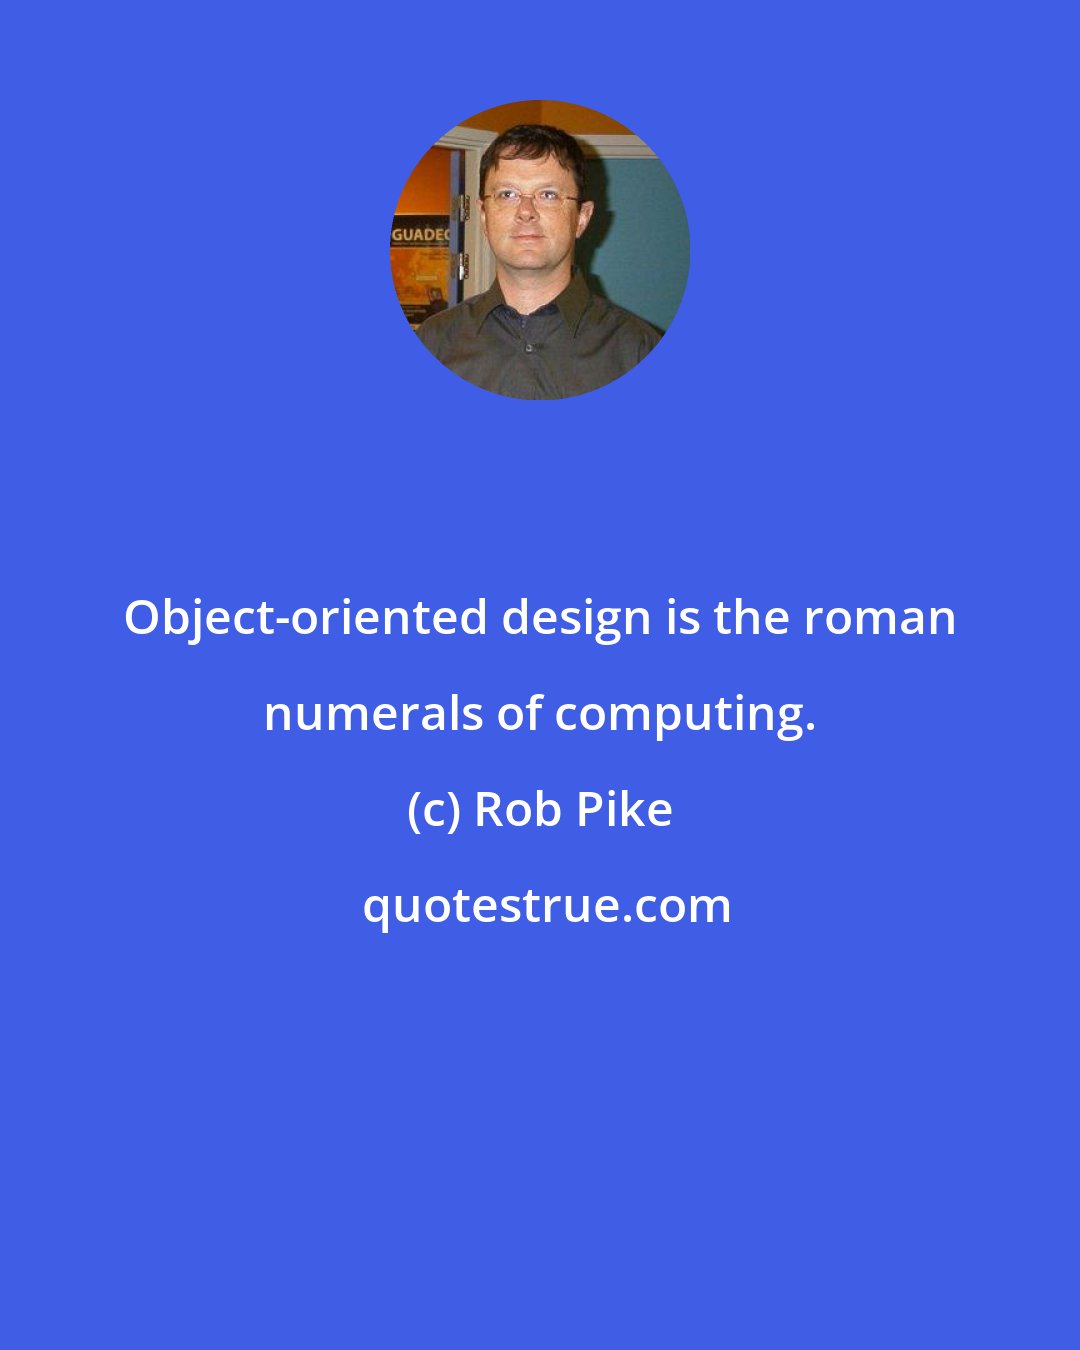 Rob Pike: Object-oriented design is the roman numerals of computing.